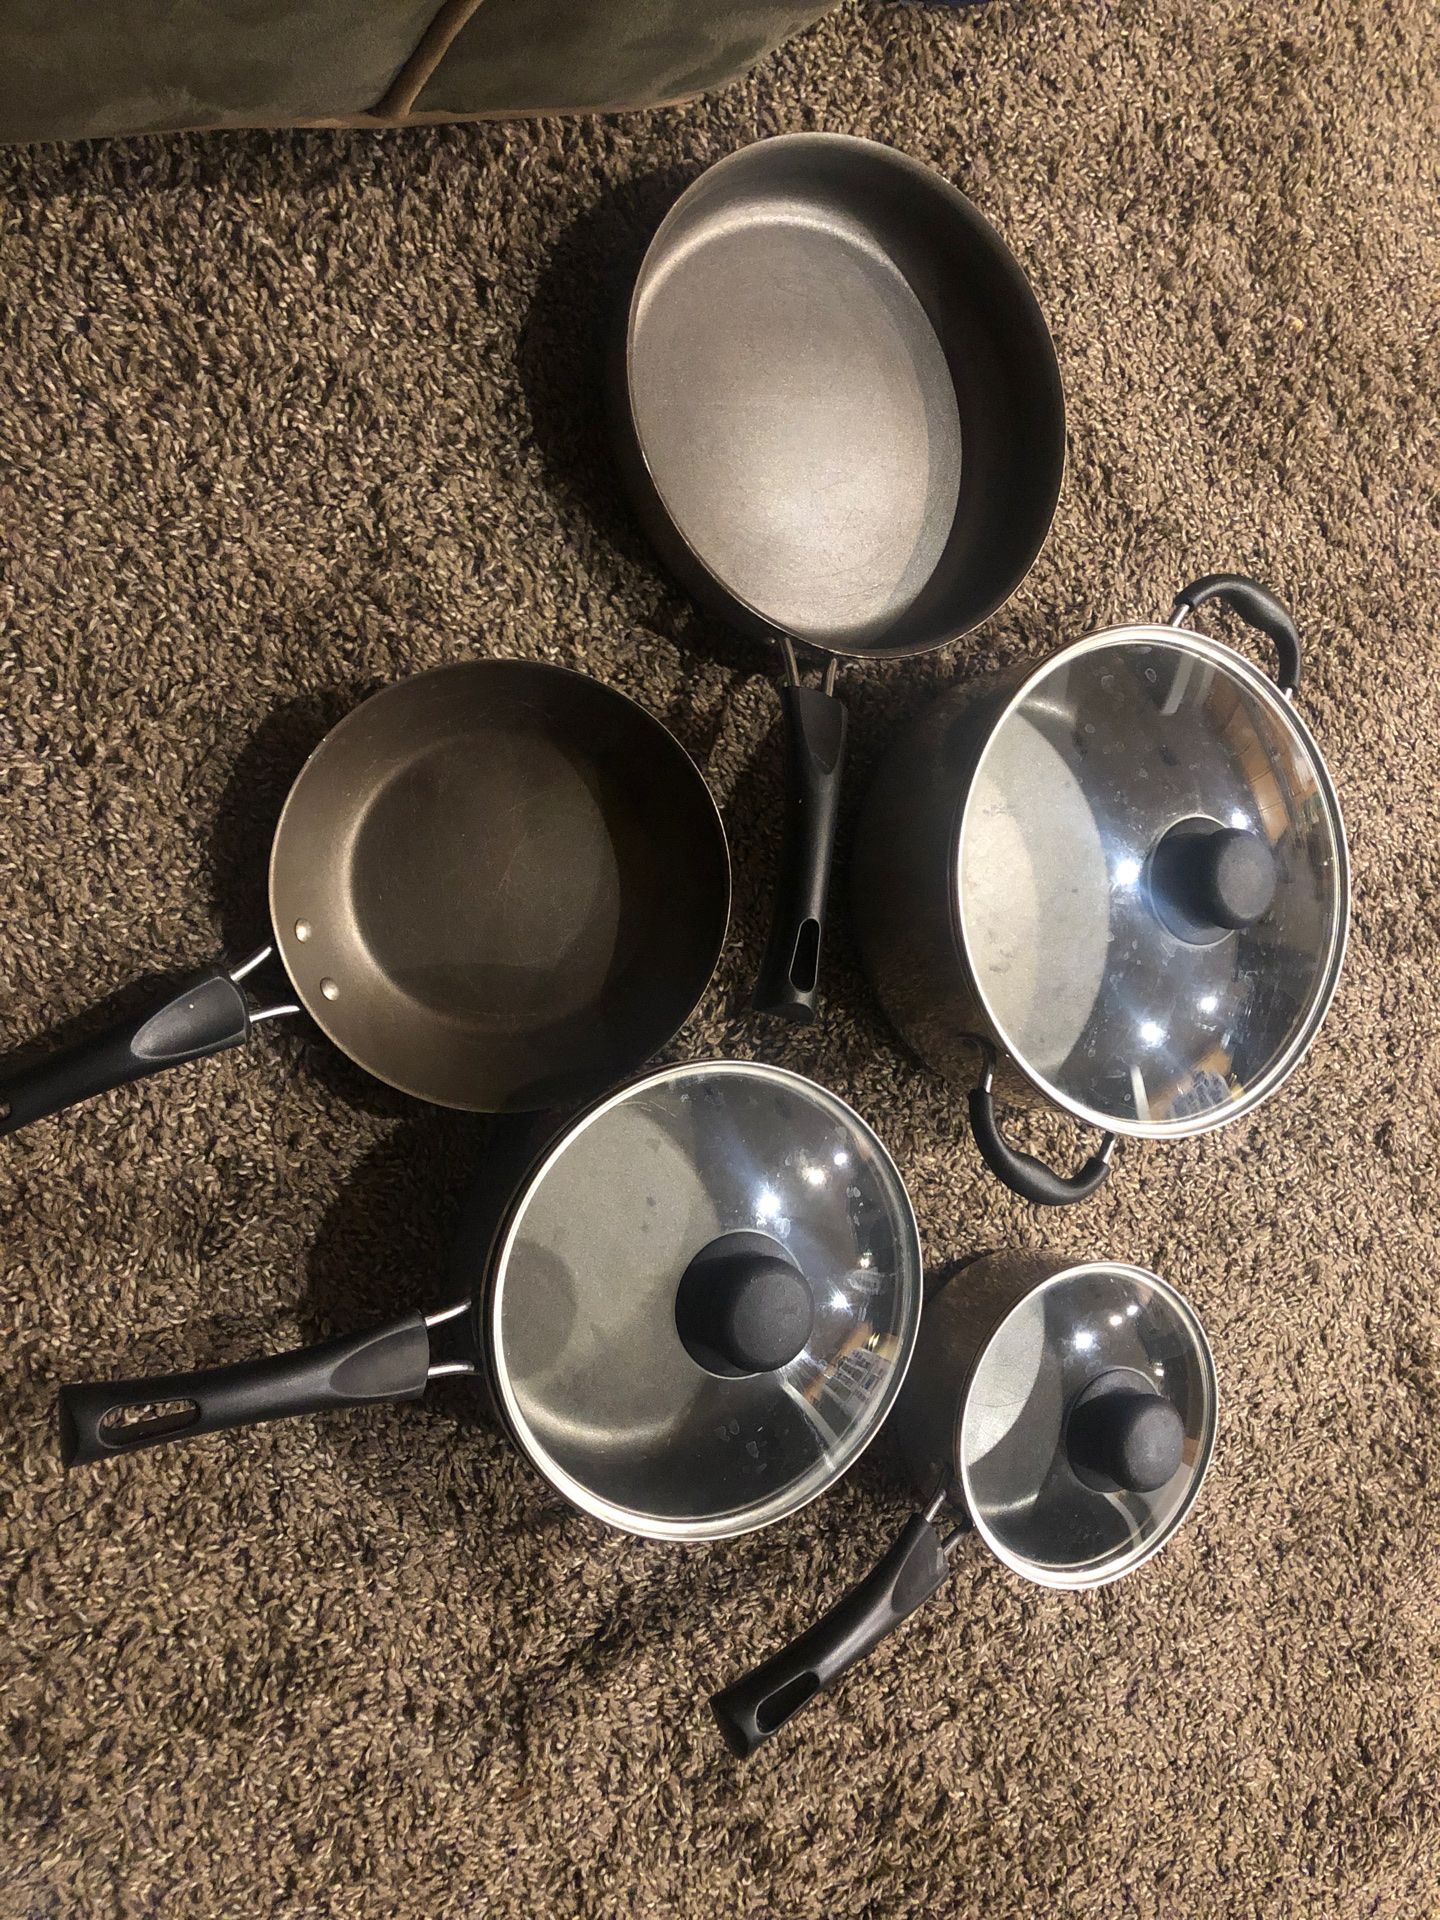 Pots and pans with lids, nonstick